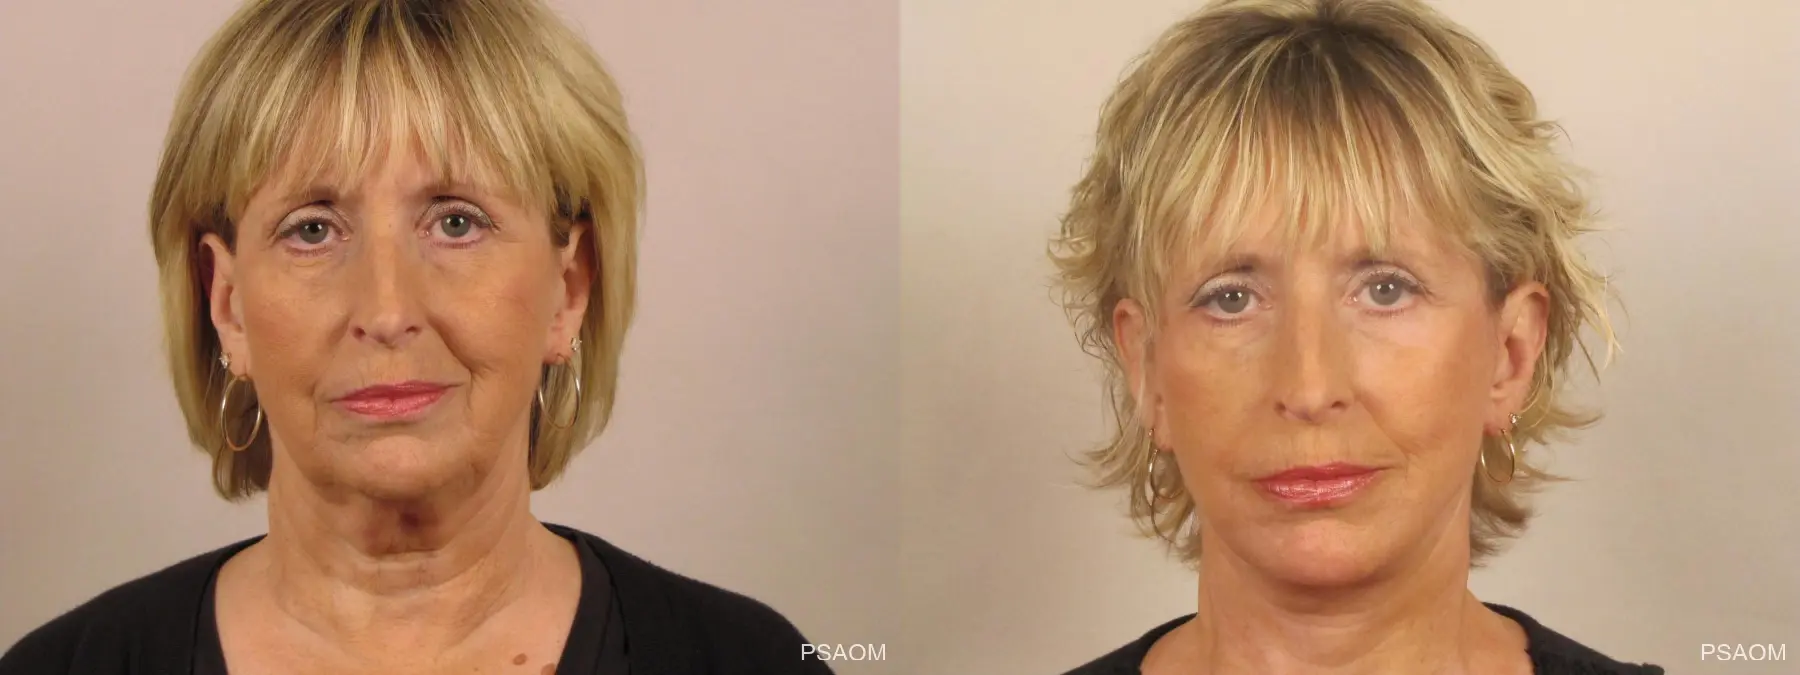 Facelift: Patient 2 - Before and After 1